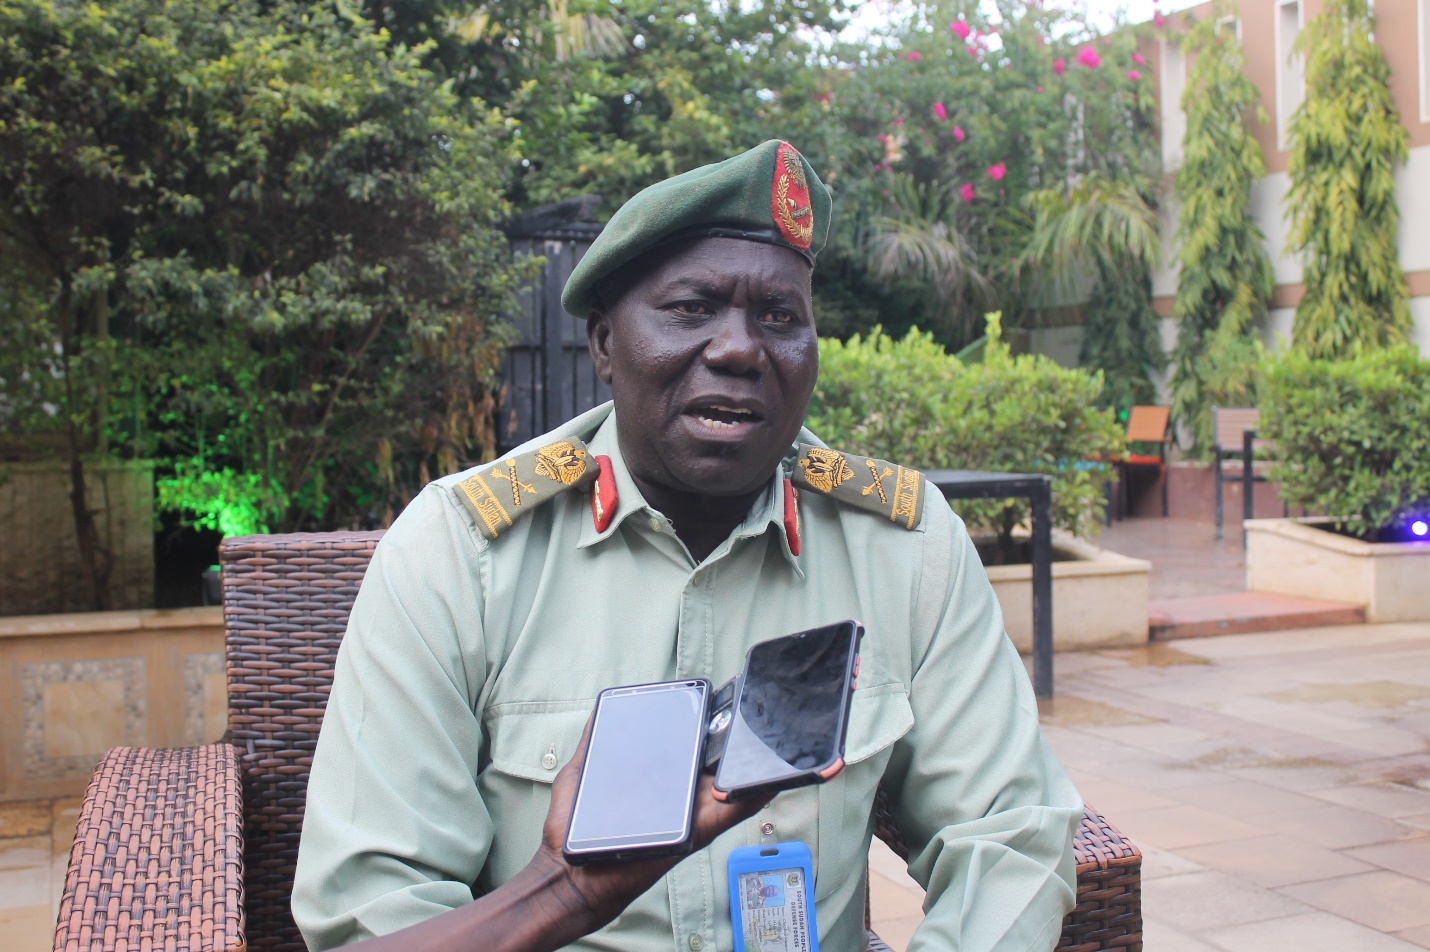 No child soldiers recruited by SSPDF in NBGS, says Khamis